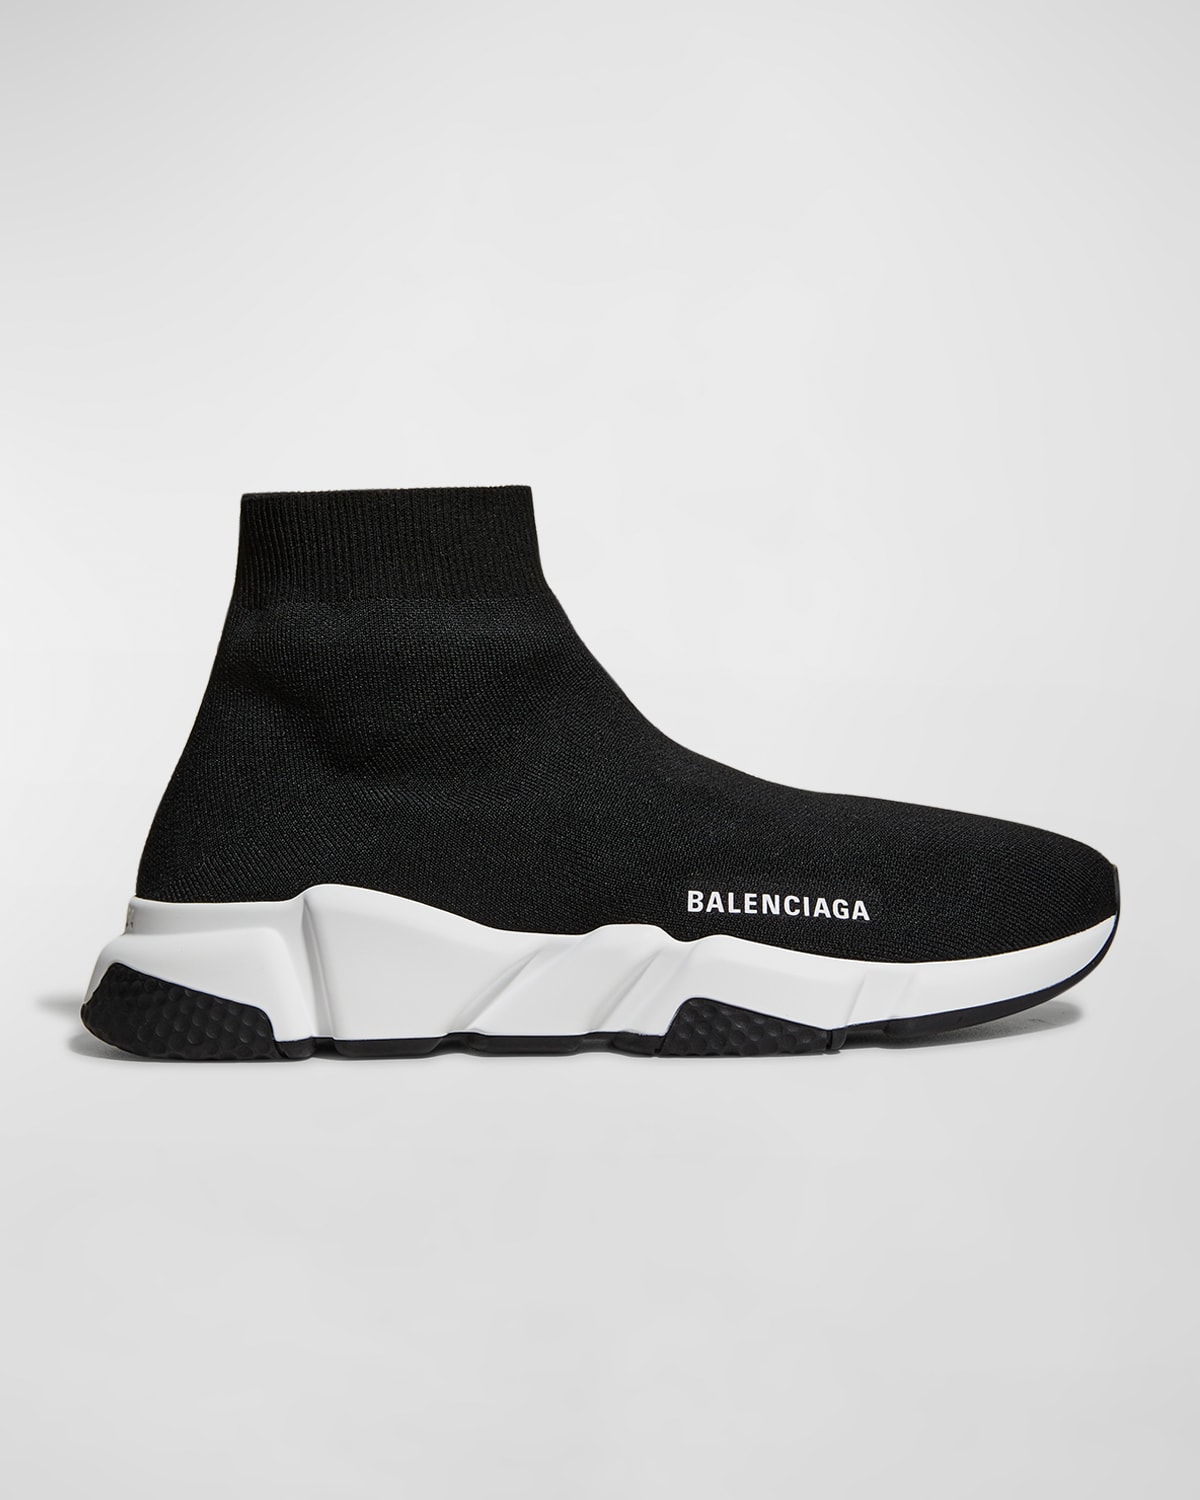 BALENCIAGA SPEED 2.0 KNIT SOCK TRAINER SNEAKERS